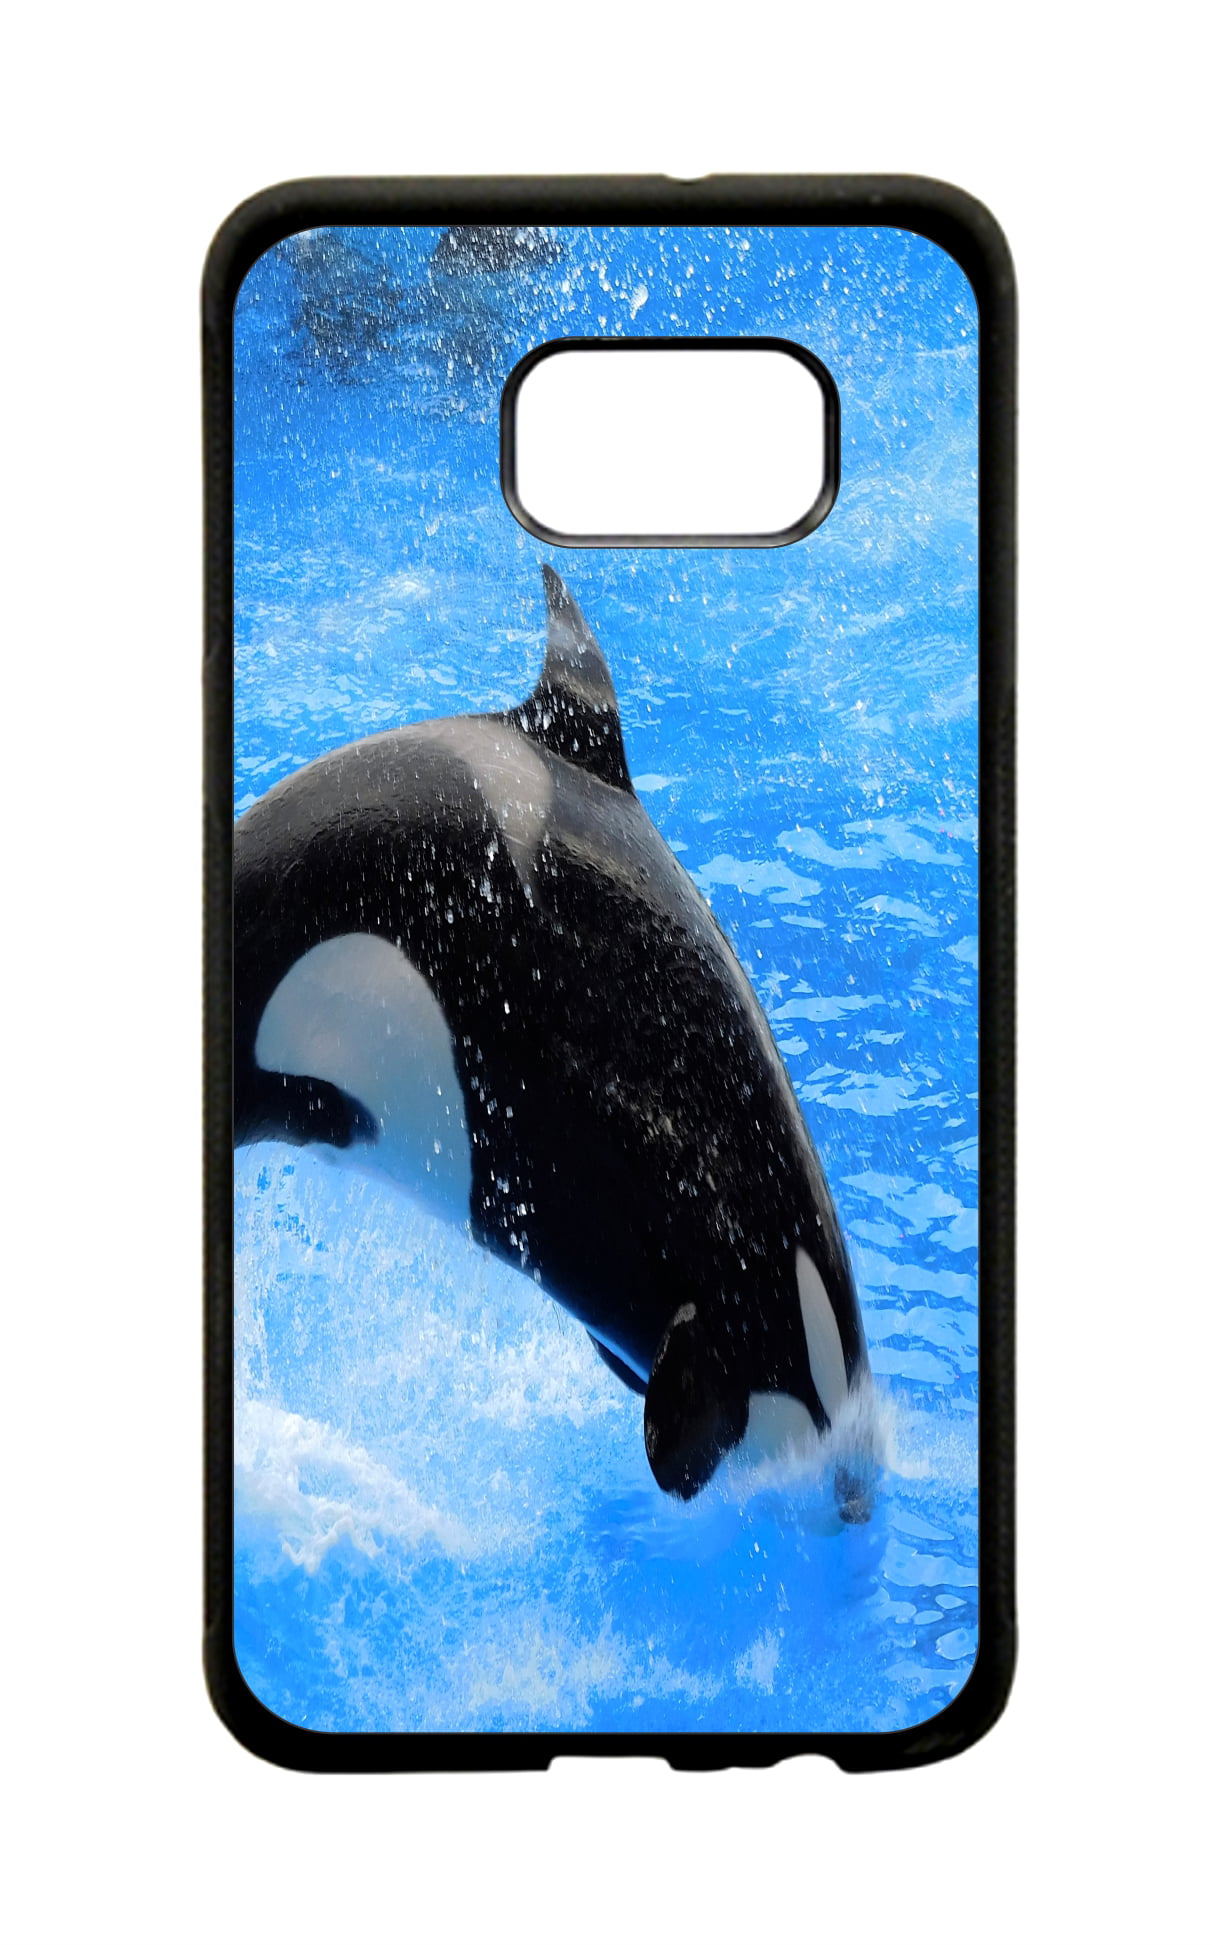 Orca Killer Whale in the Ocean Design Black Plastic Protective Phone Case  That Is Compatible with the Samsung Galaxy s8 